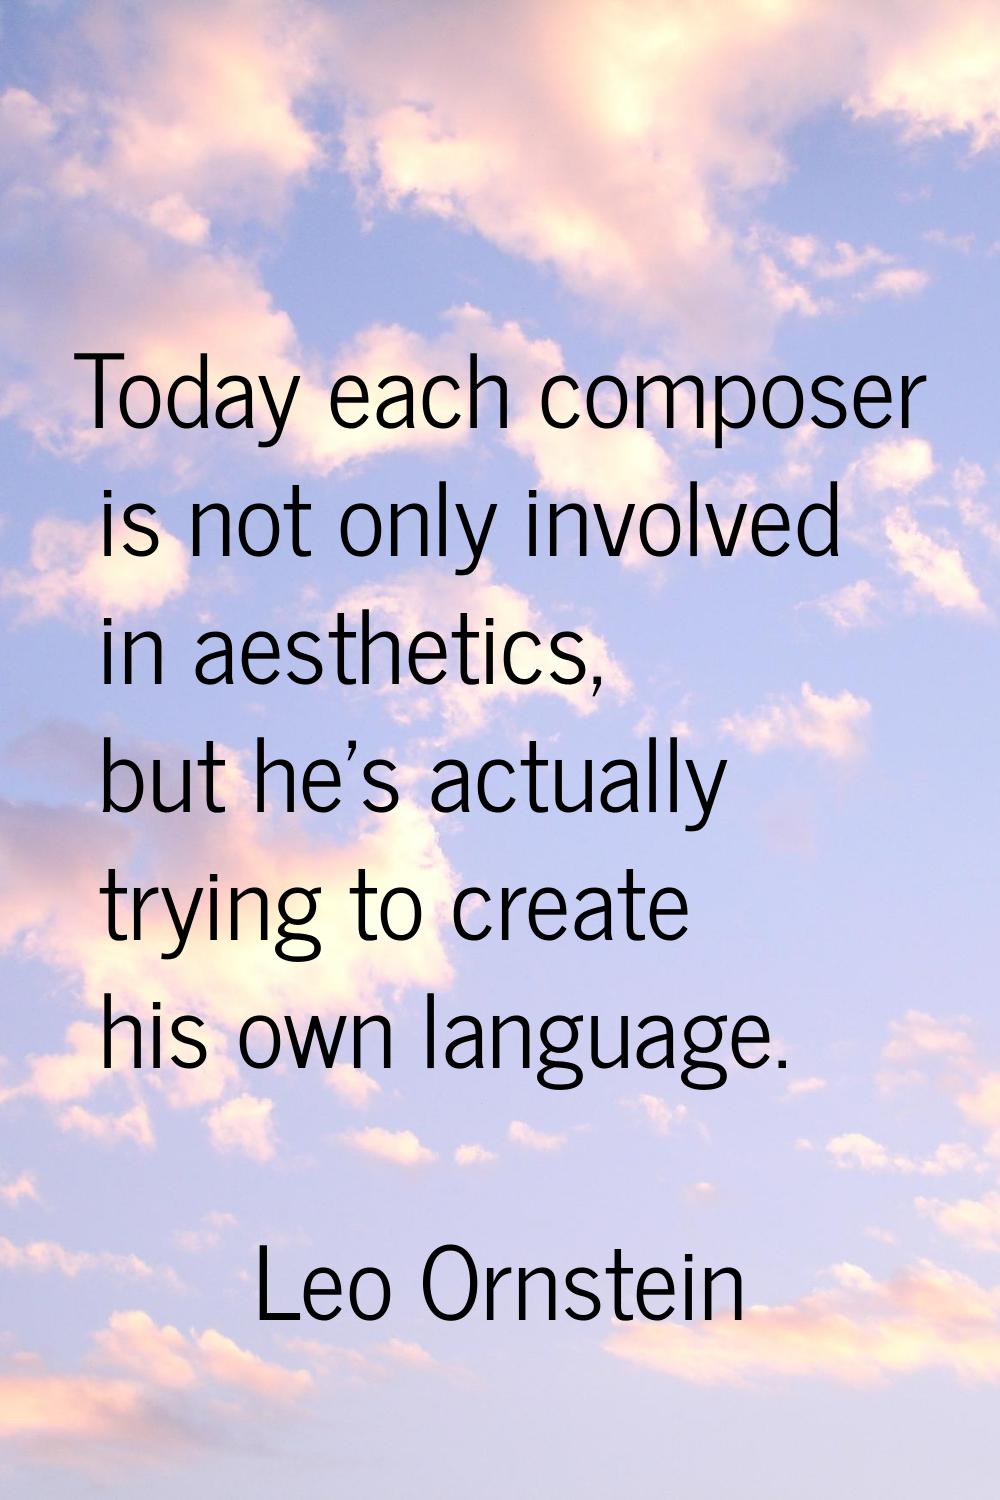 Today each composer is not only involved in aesthetics, but he's actually trying to create his own 